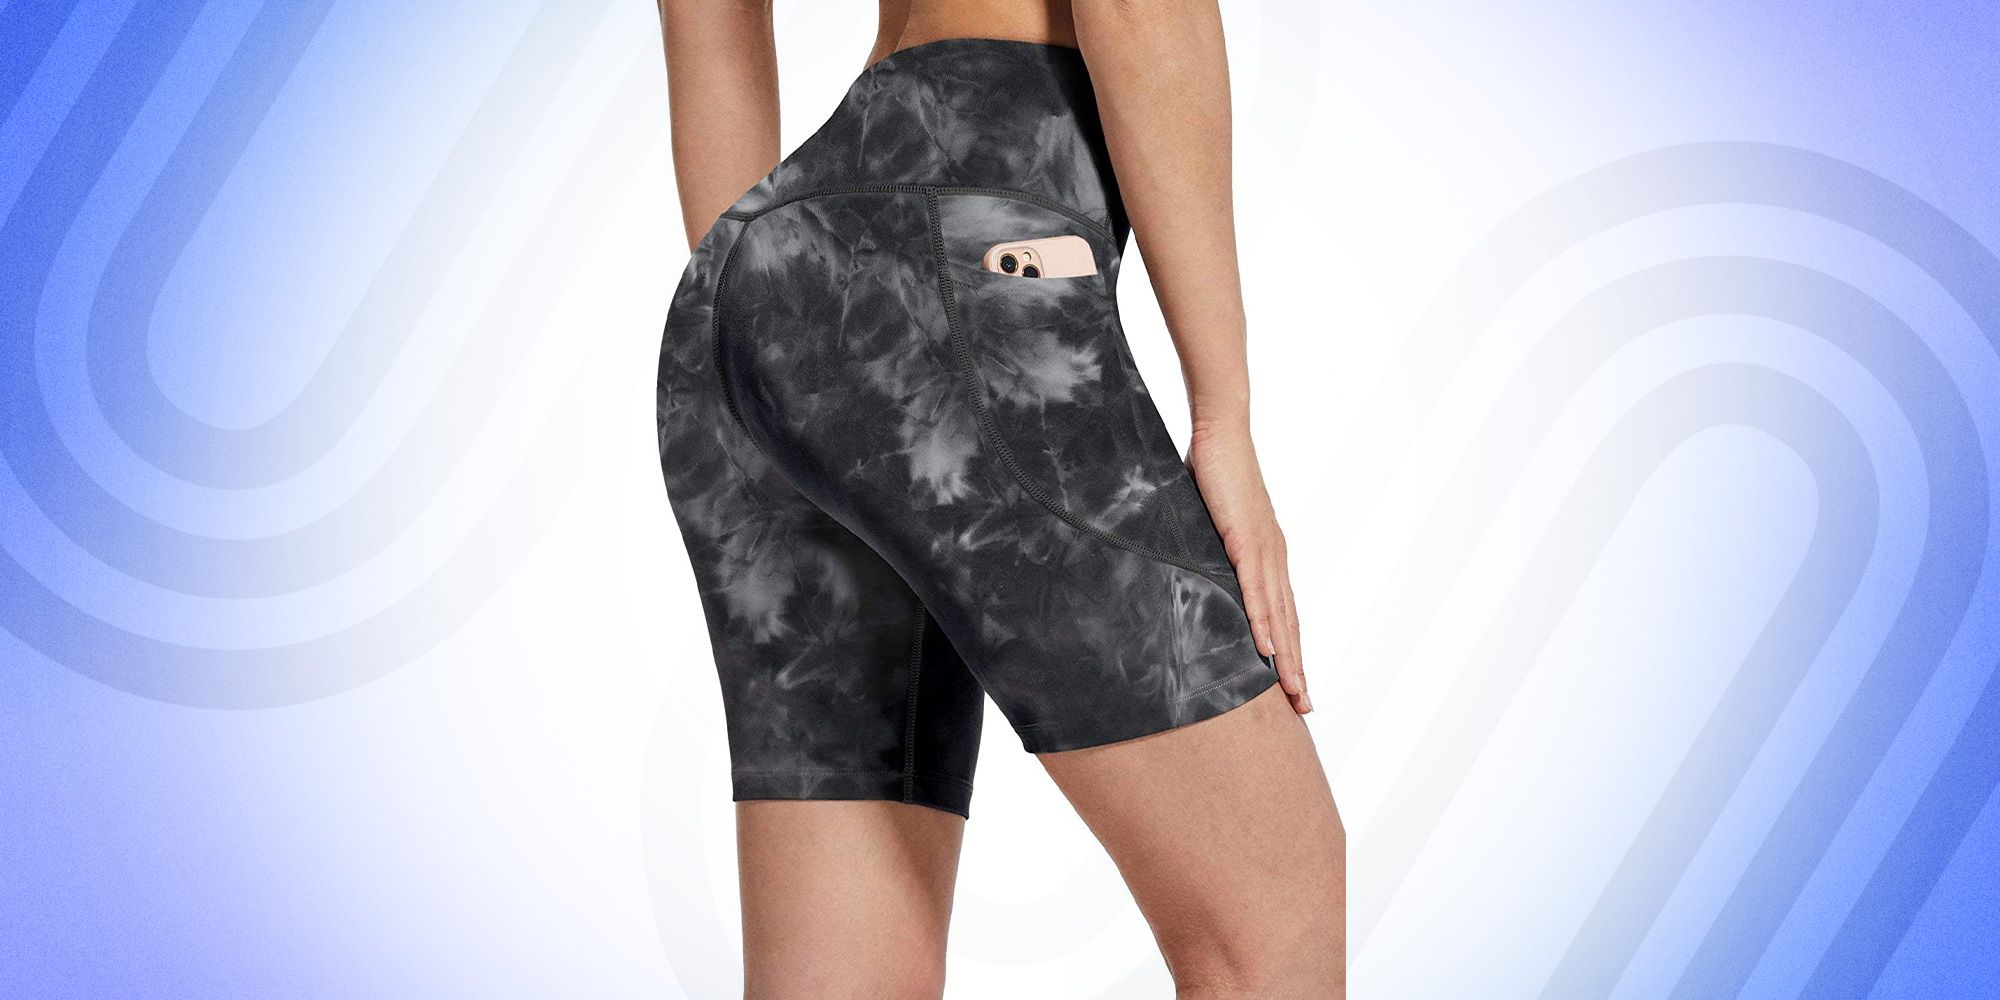 Yoga Shorts for Men and Women - 6 Best Yoga Shorts of 2022 - Kids